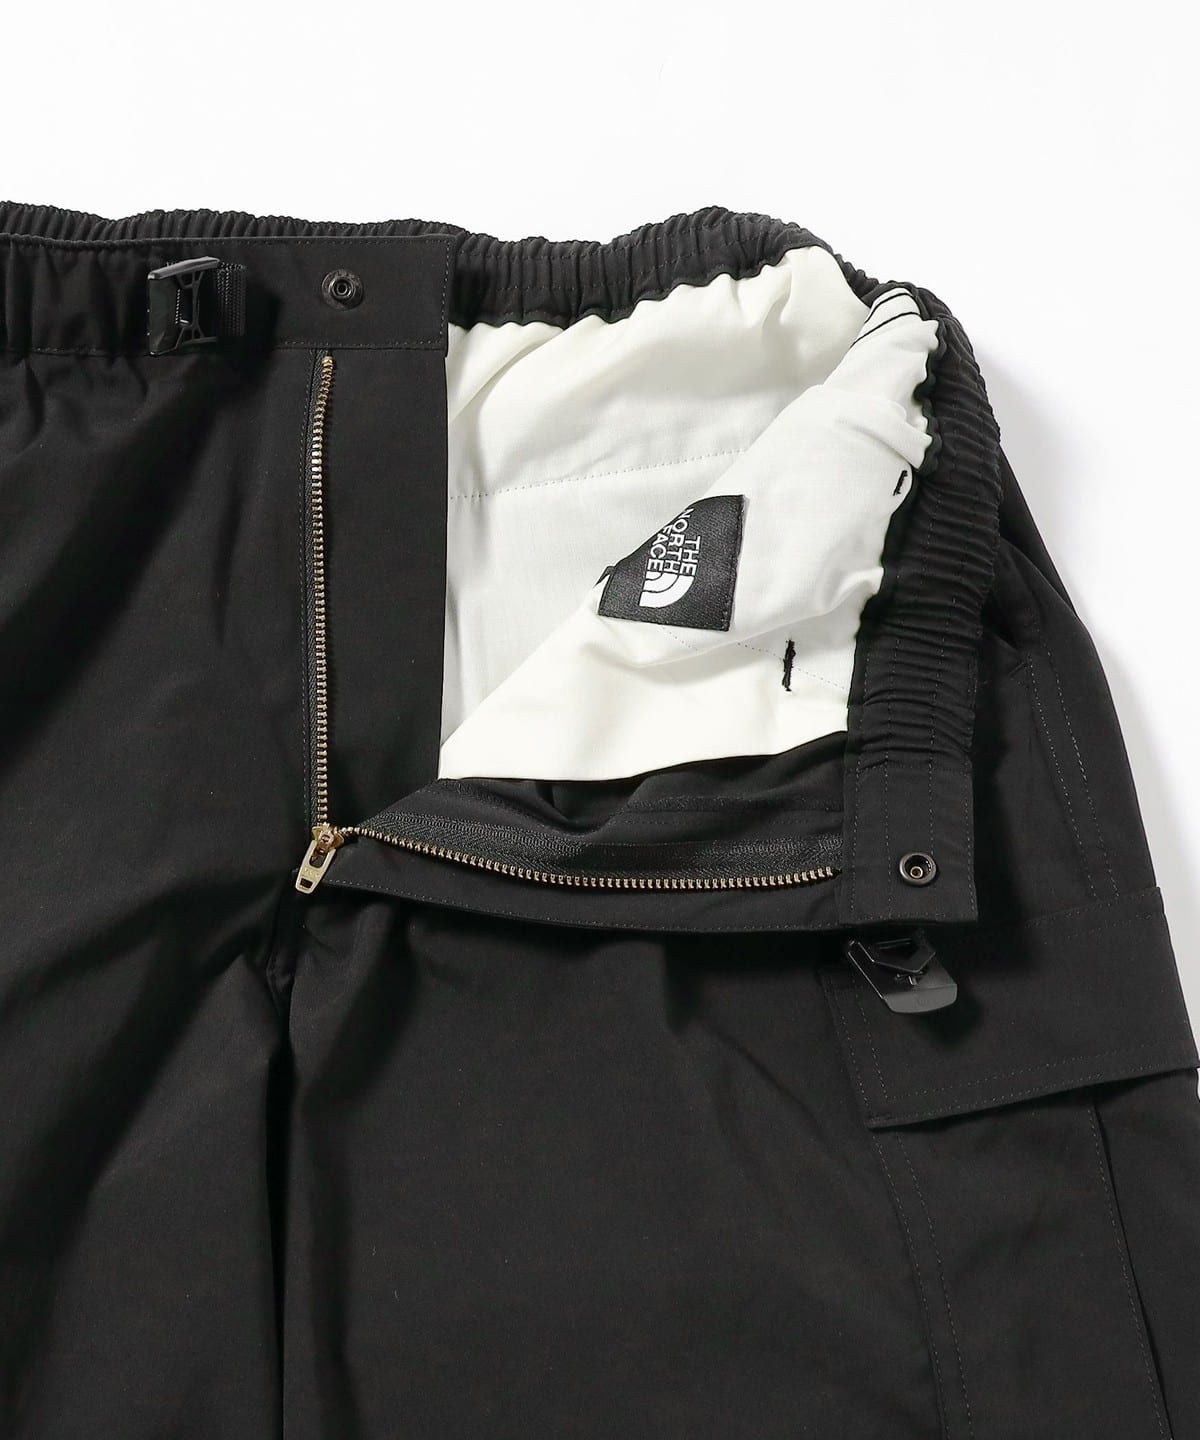 BEAMS（ビームス）THE NORTH FACE / Zip Off Cargo Pant（パンツ 